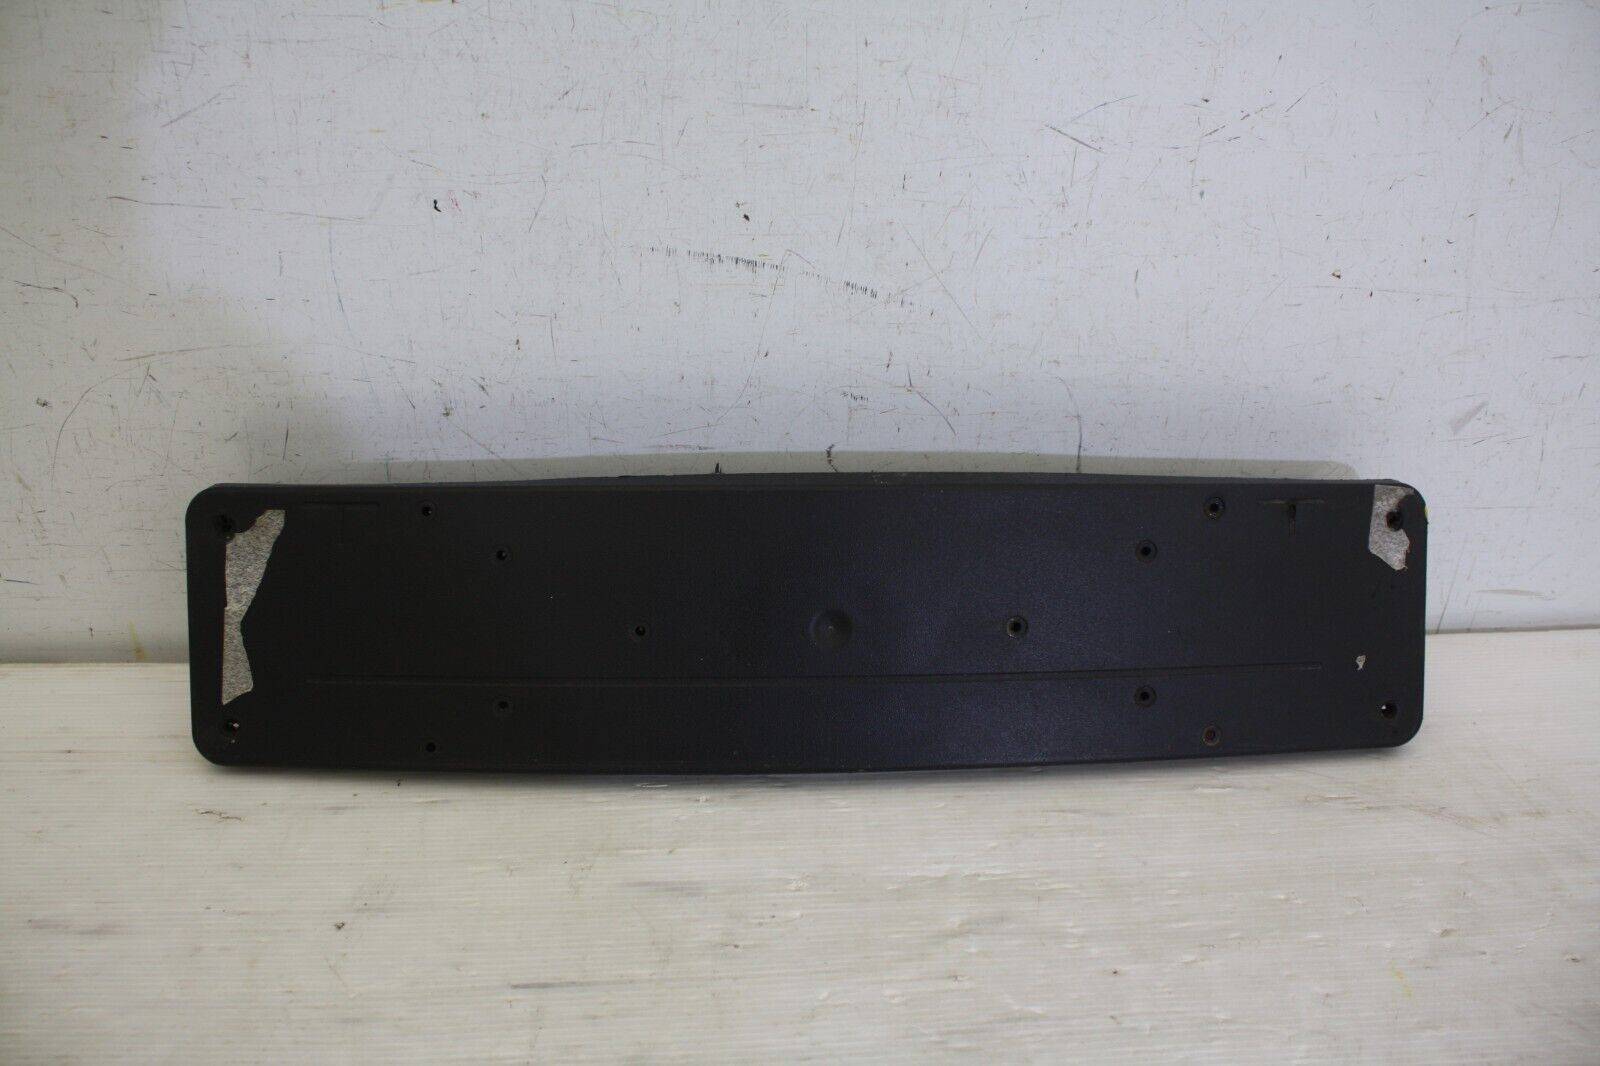 Mercedes M Class W166 Front Bumper Number Plate 2012 2015 A1668850181 DAMAGED 175983741173